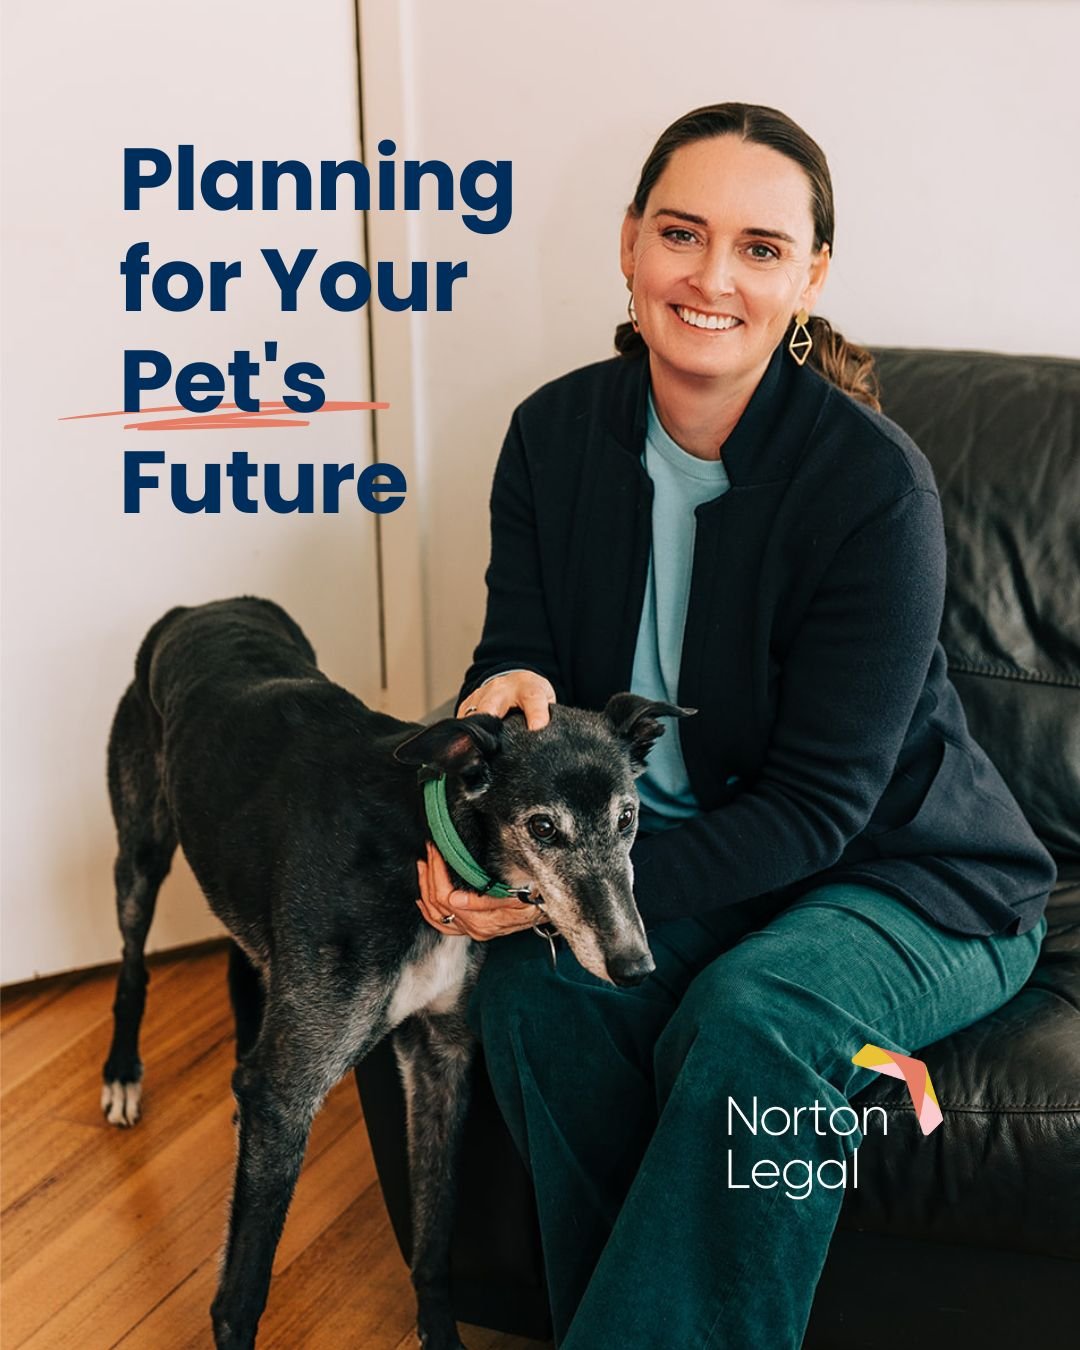 🐾 Planning for Your Pet's Future🐾

Our pets bring us immeasurable joy, but the reality is, their lifespans are often shorter than ours. It's a sobering thought, but ensuring ongoing care for your furry friend is a responsibility every pet guardian 